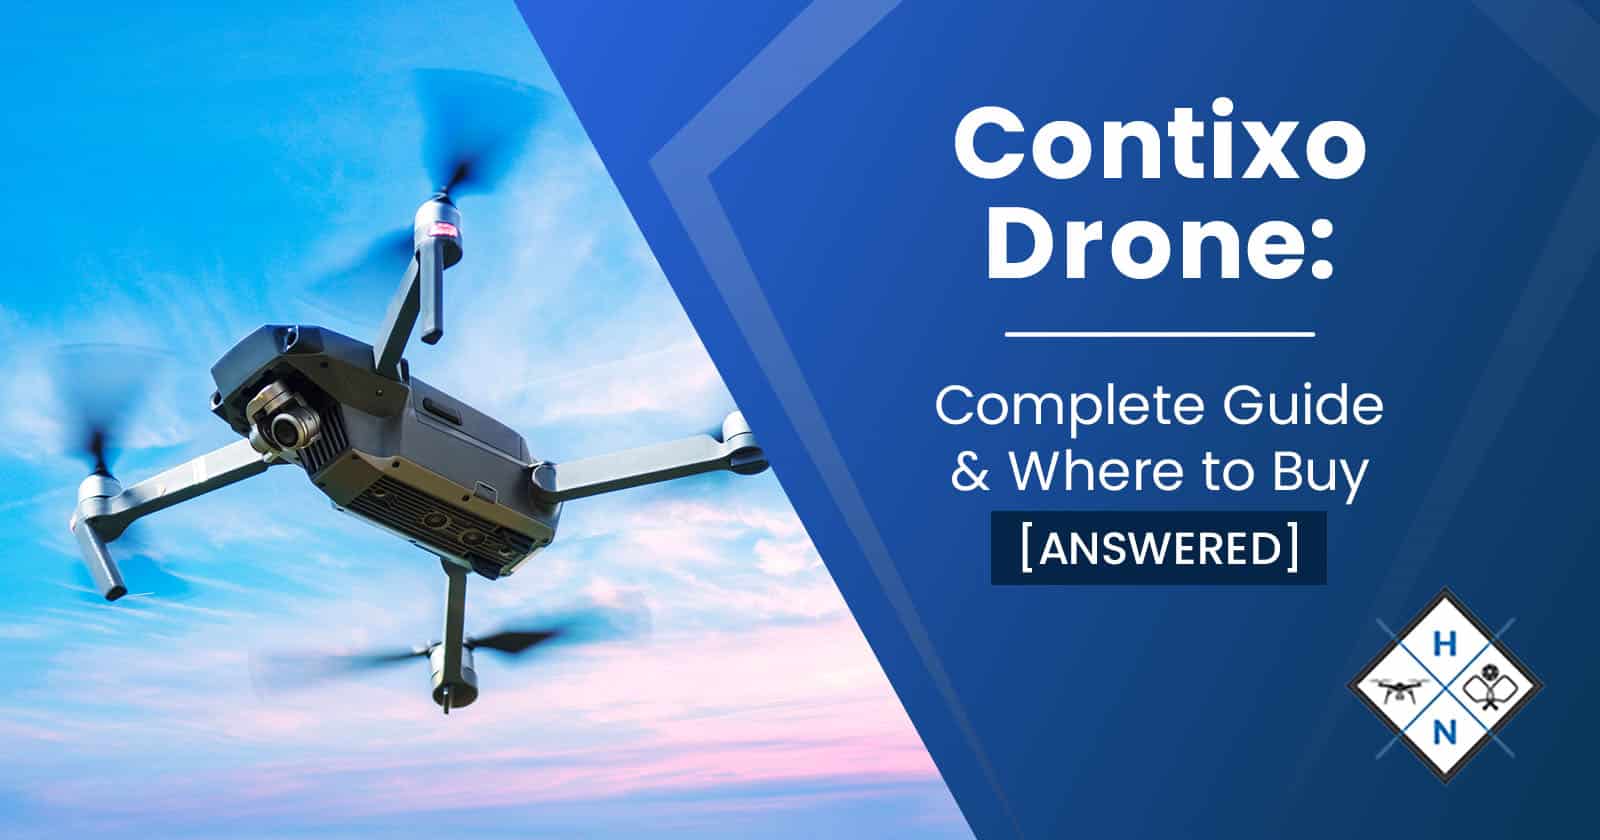 Contixo Drone: Complete Guide & Where To Buy [ANSWERED]